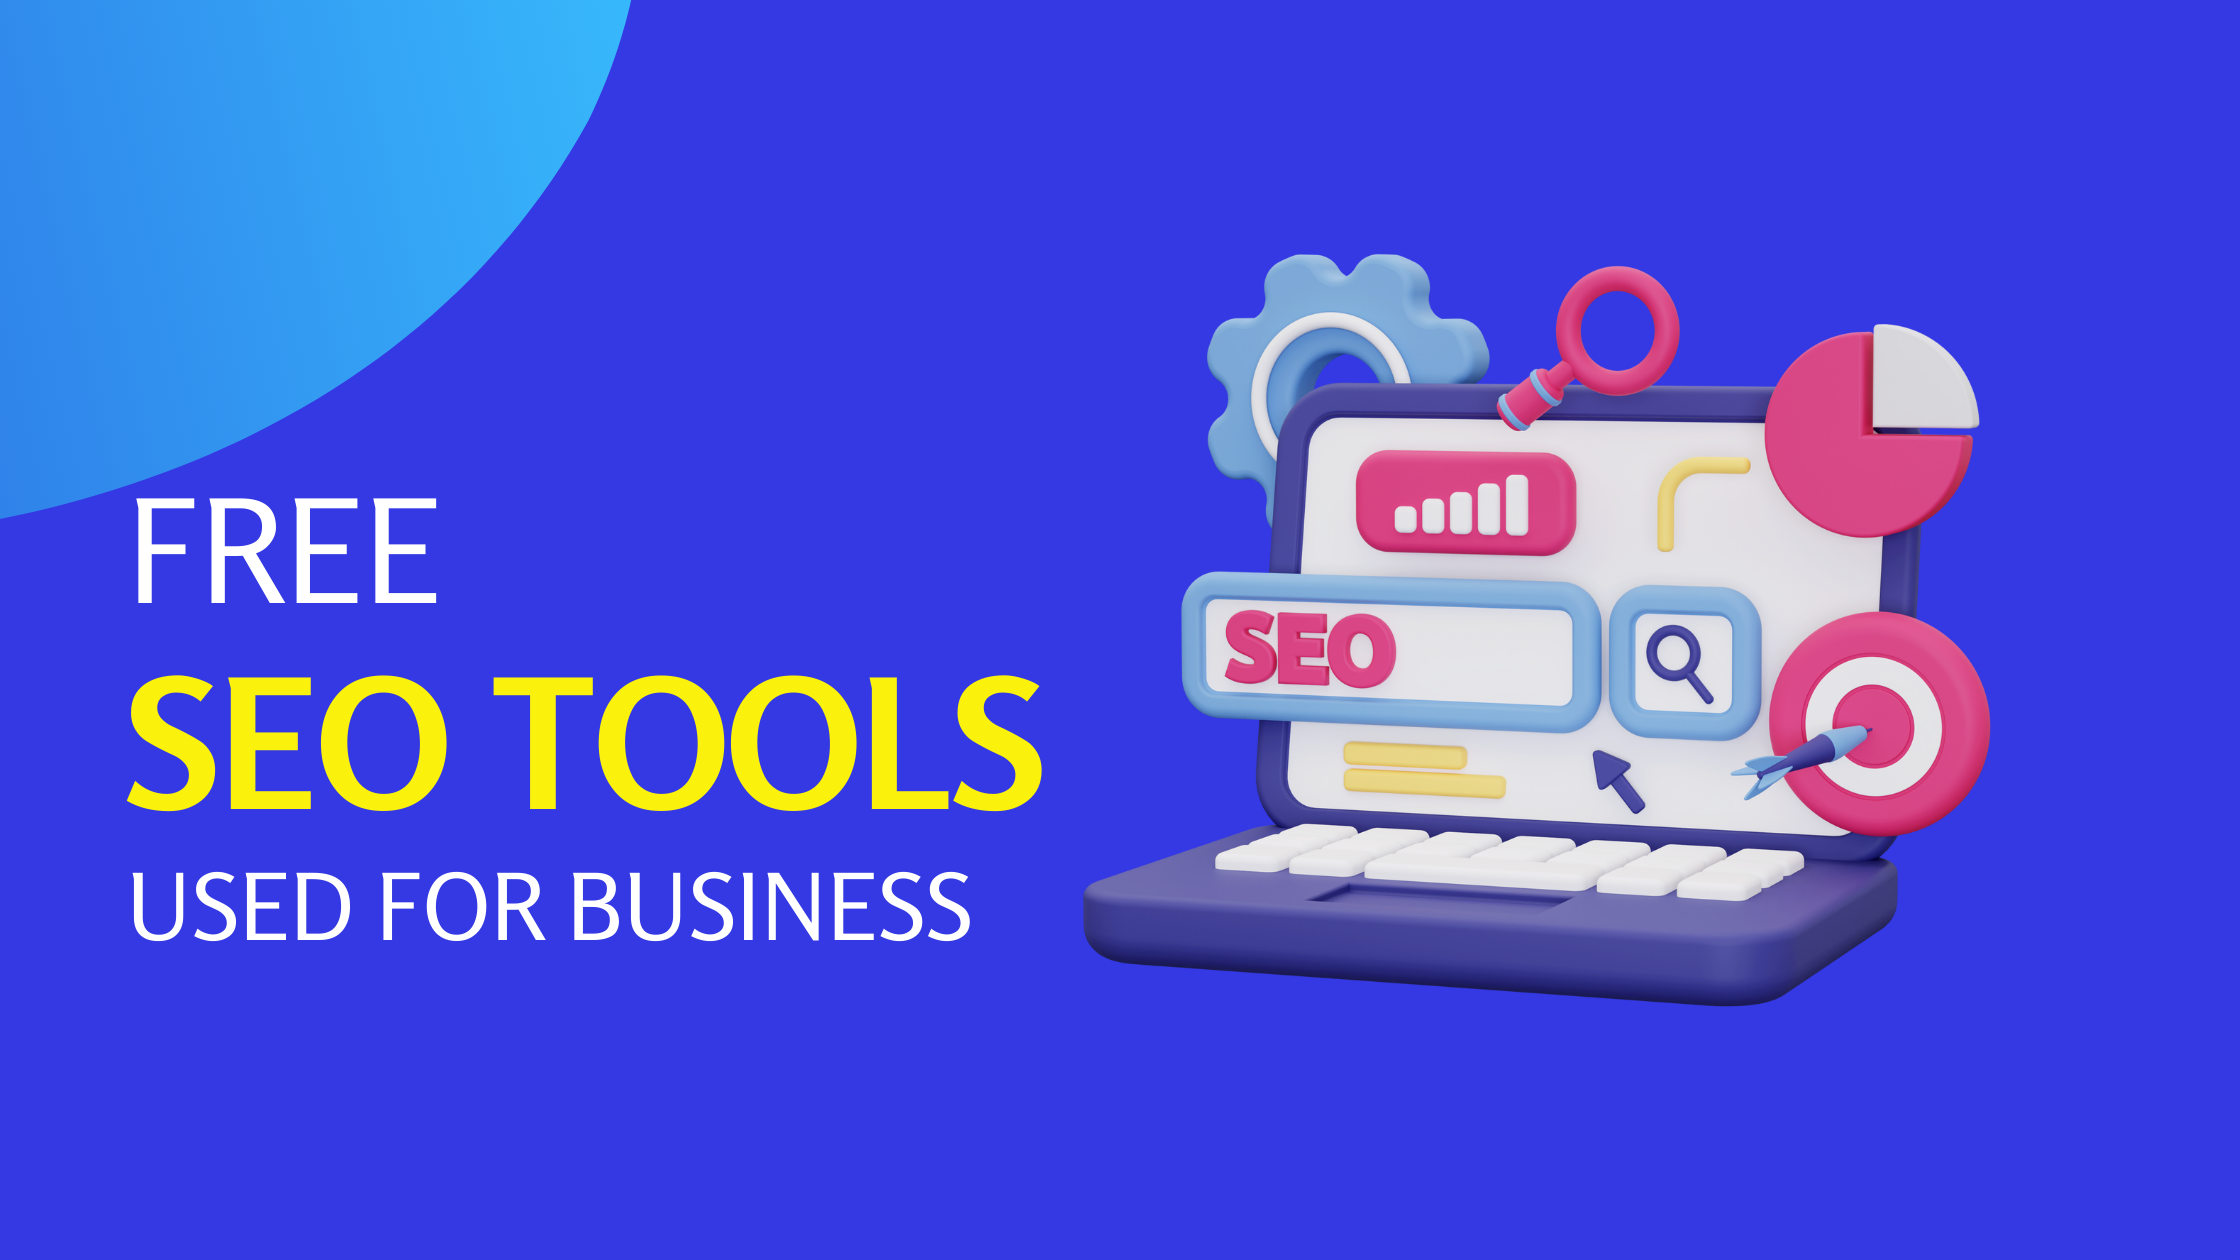 Free SEO Tools Used For Business